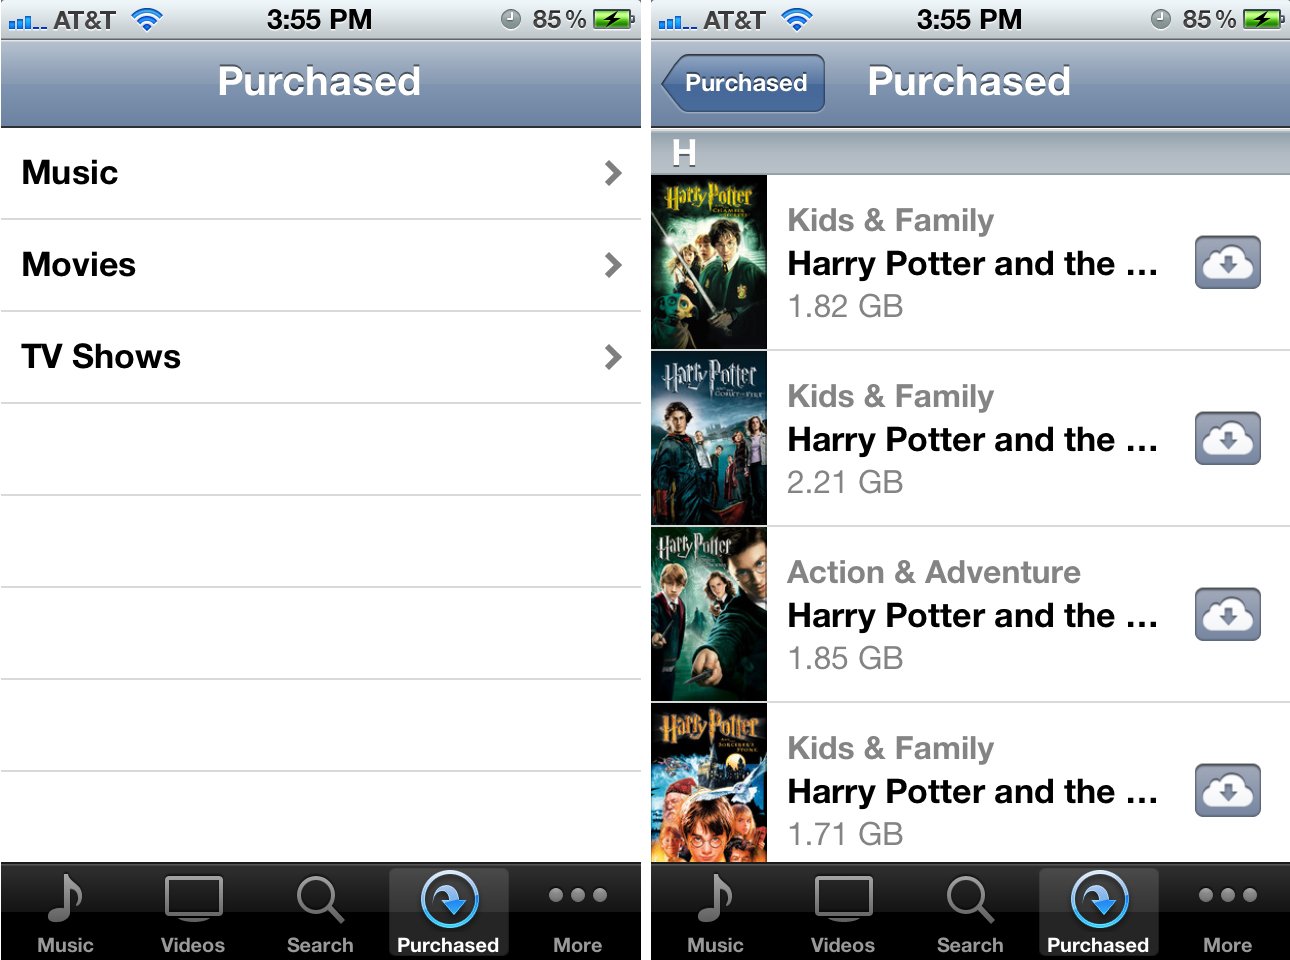 How to access purchased movies on iCloud from your iPhone or iPad